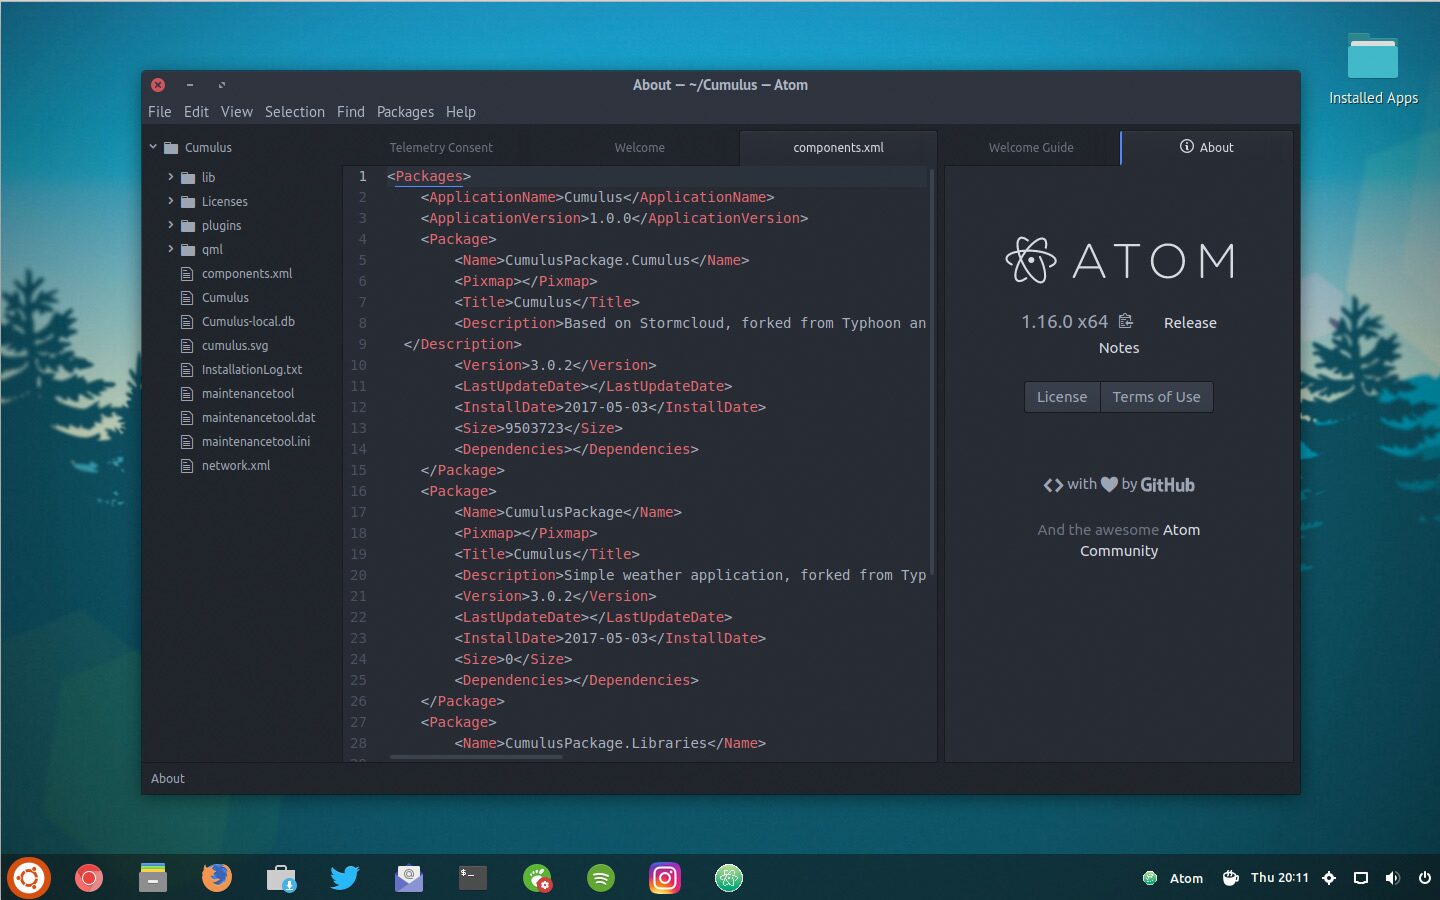 Editor editor and Atom Packages